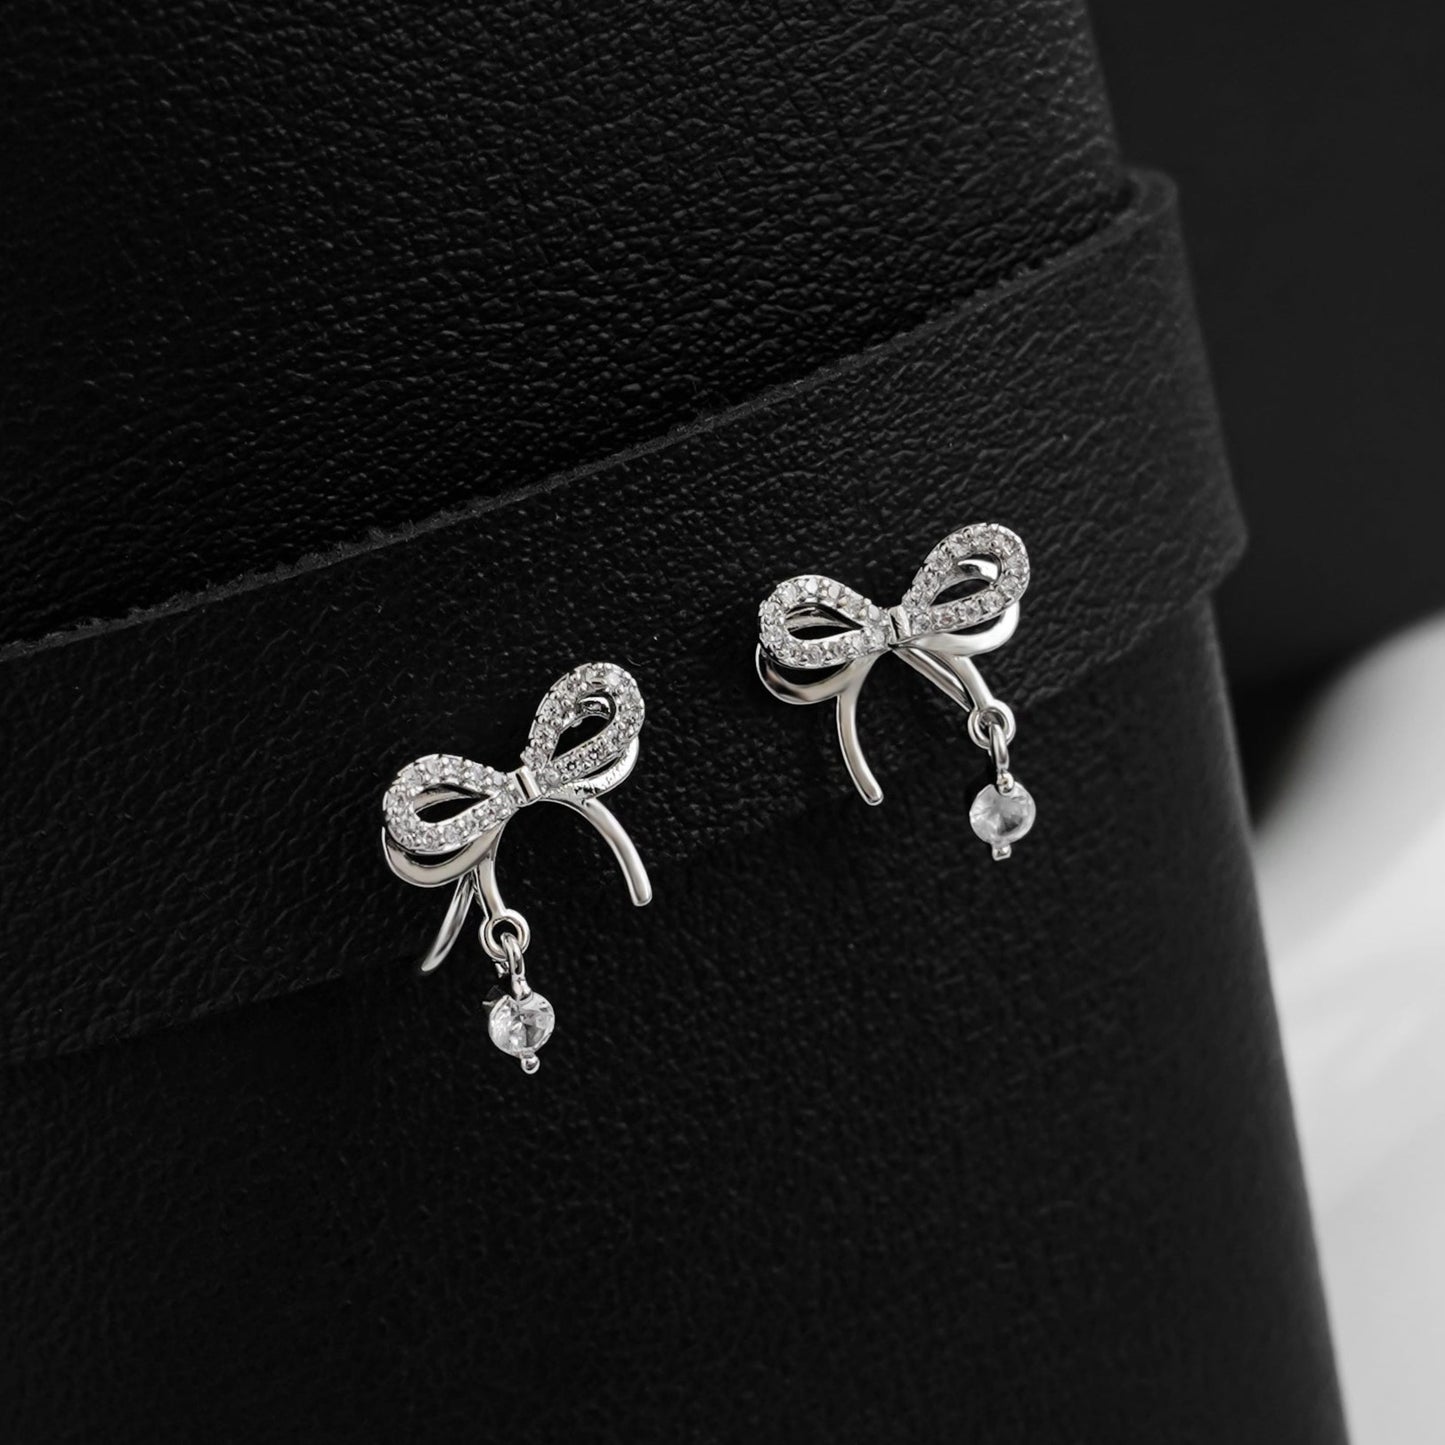 Sliver Bow with Diamond Clip On Earrings